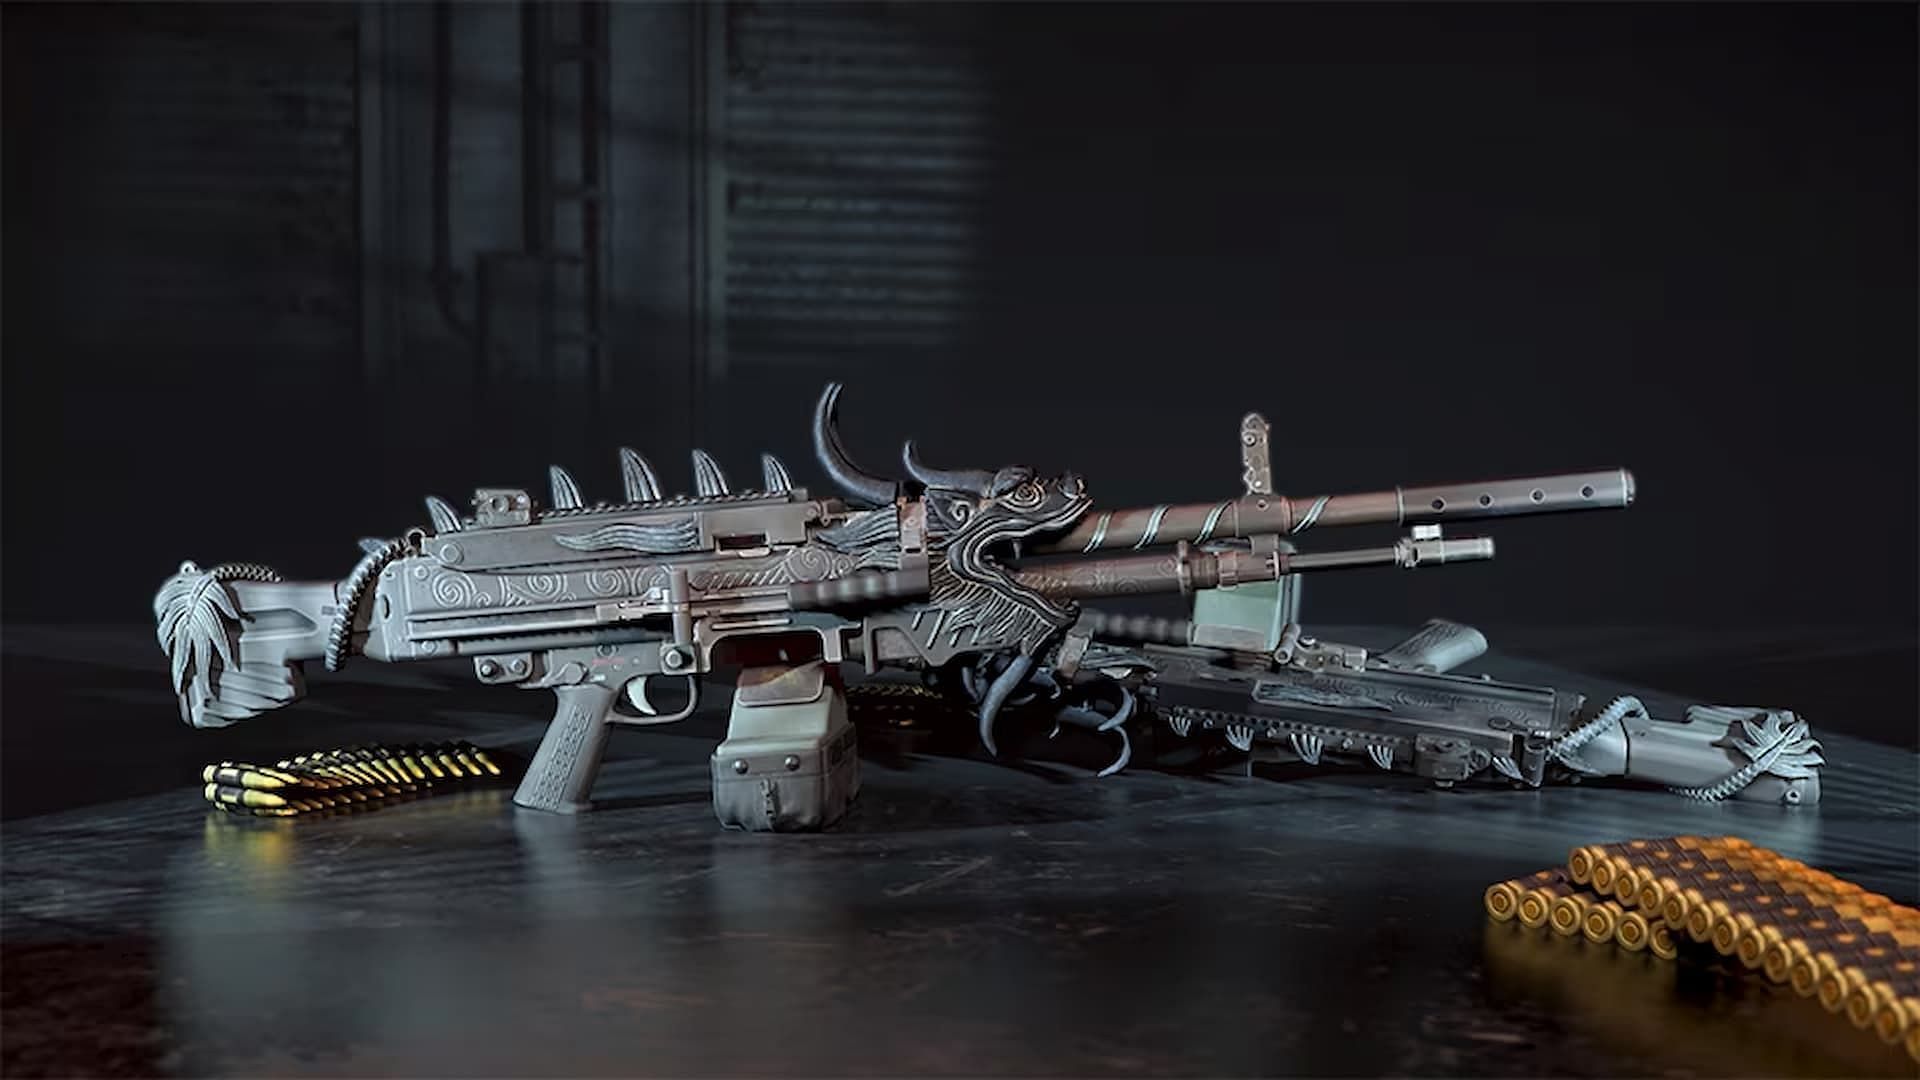 The Iron Lung LMG in The Division 2 (Image via Ubisoft)